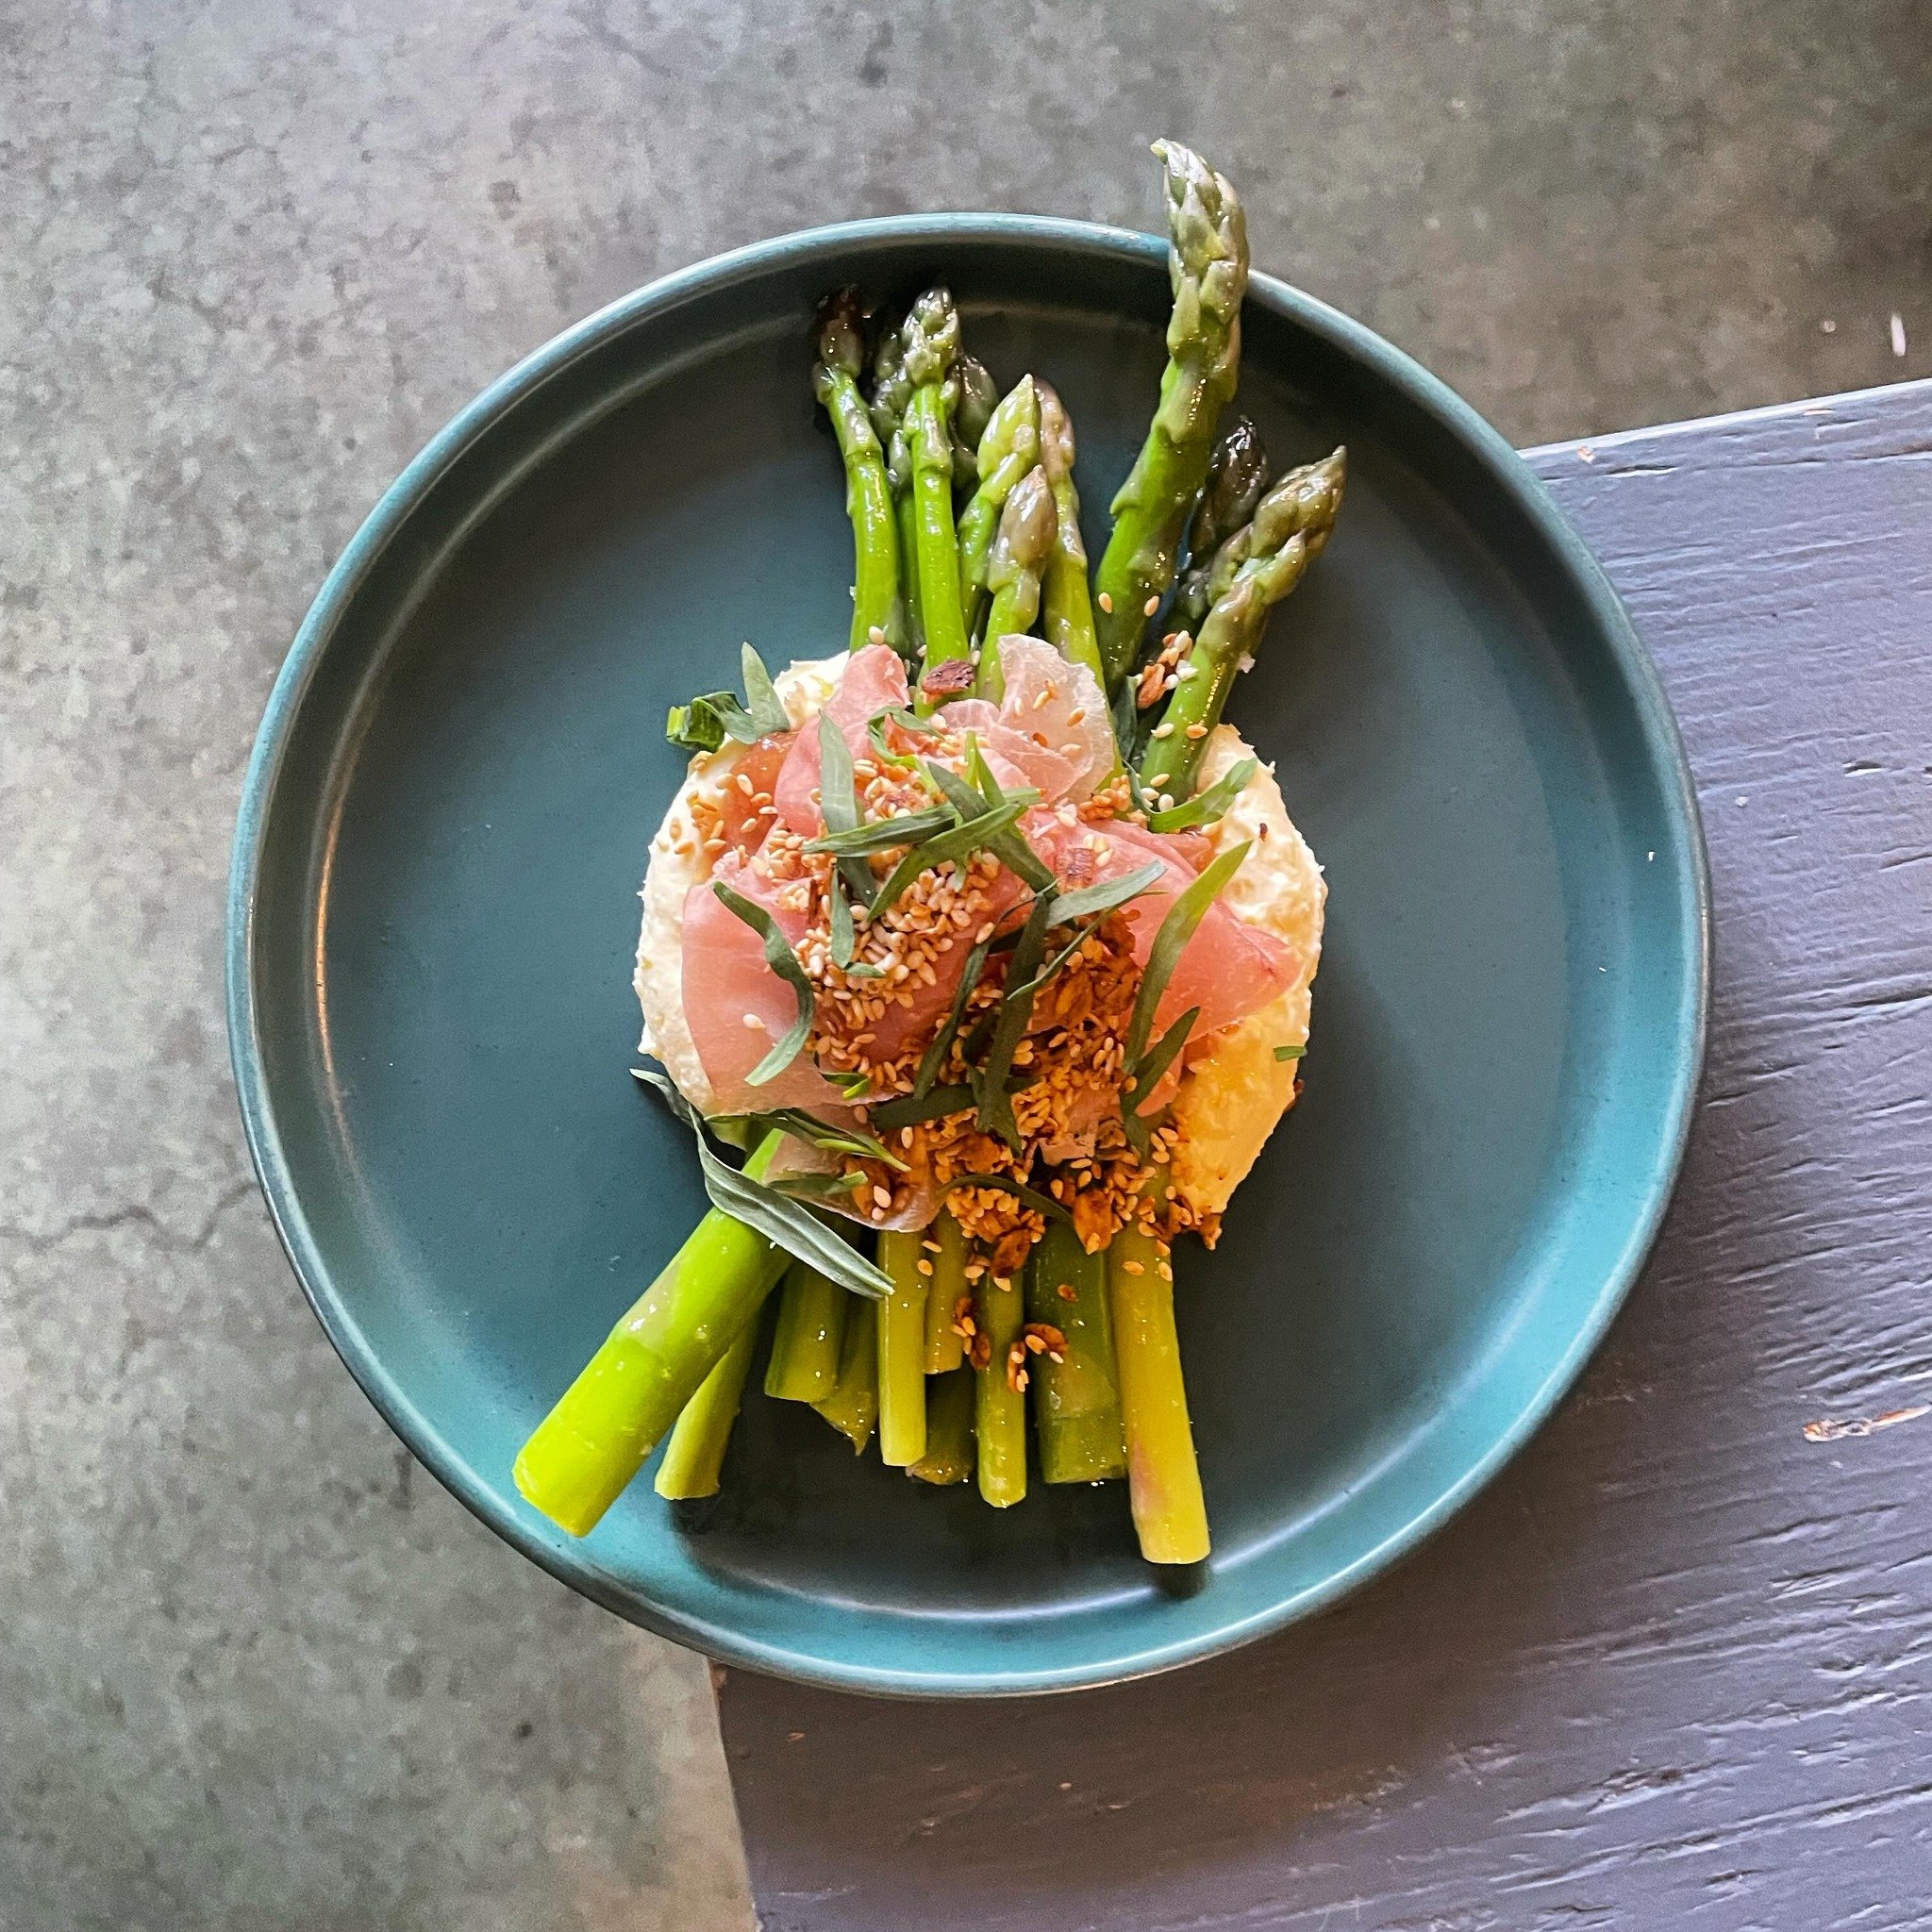 Seating 4-9 Sundays 🌞!

📸 Asparagus time of year is one of the best 🎍!
Ours is perfectly blanched with Parmesan pudding, orange rhubarb marmalade, brown butter sesame granola, &amp; tarragon. 

If you&rsquo;re celebrating Mother&rsquo;s Day with u